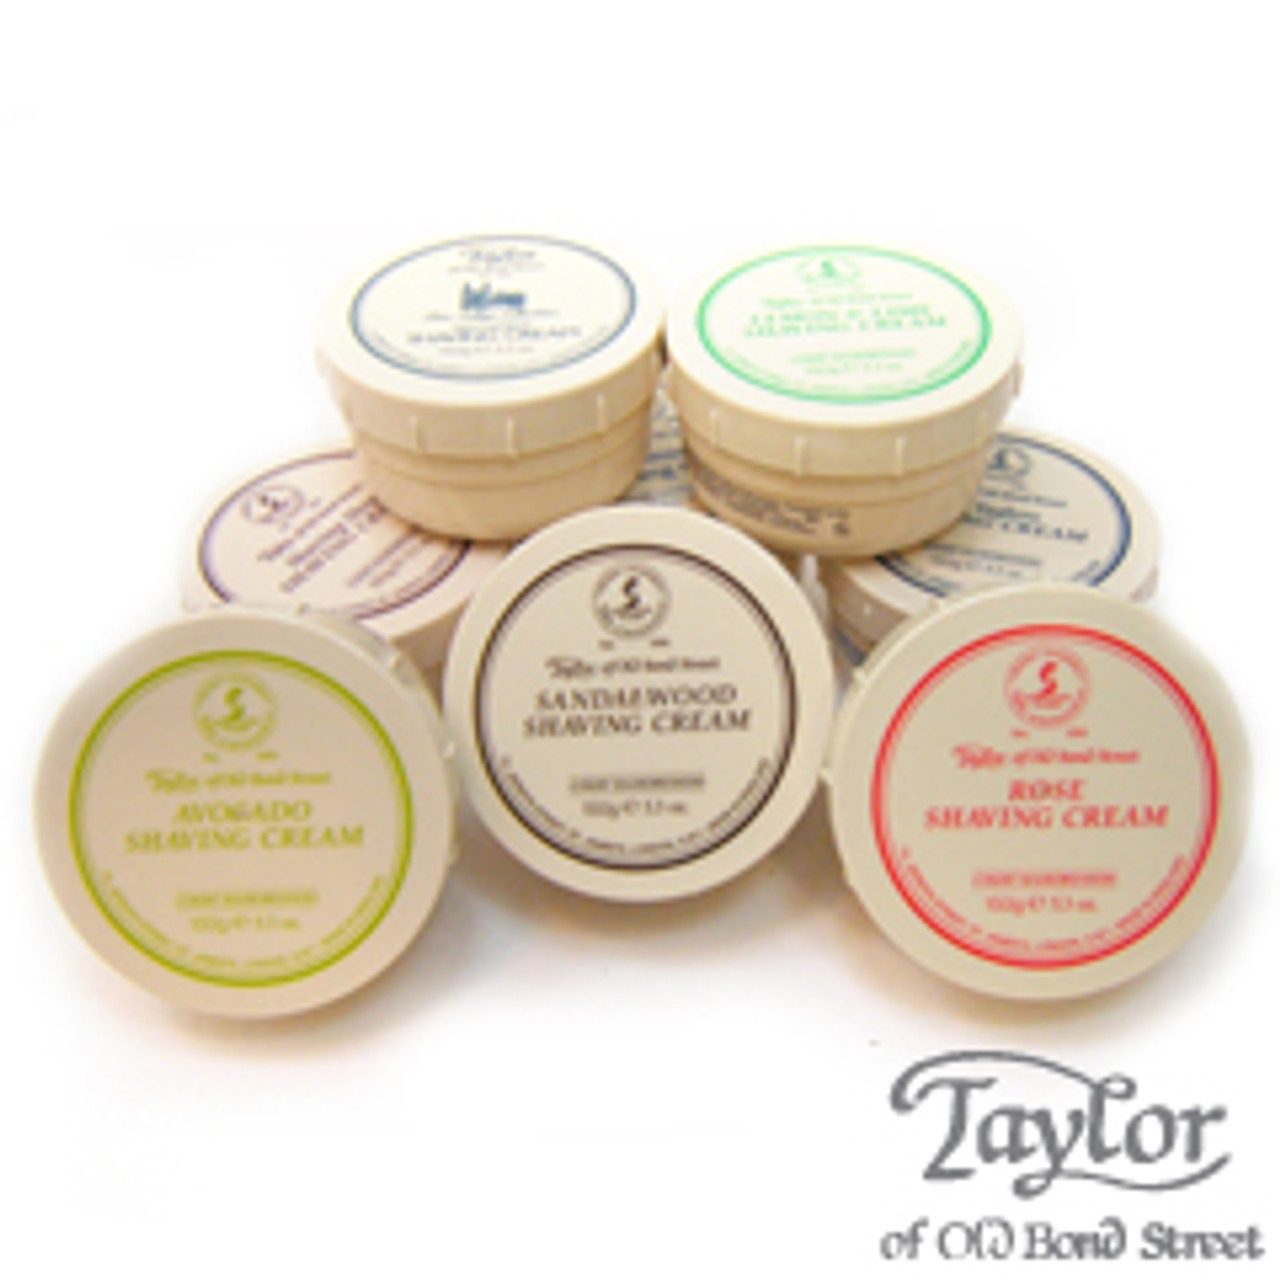 Taylors of Bowl Shaving Cream Street in Old Bond Forest Royal a